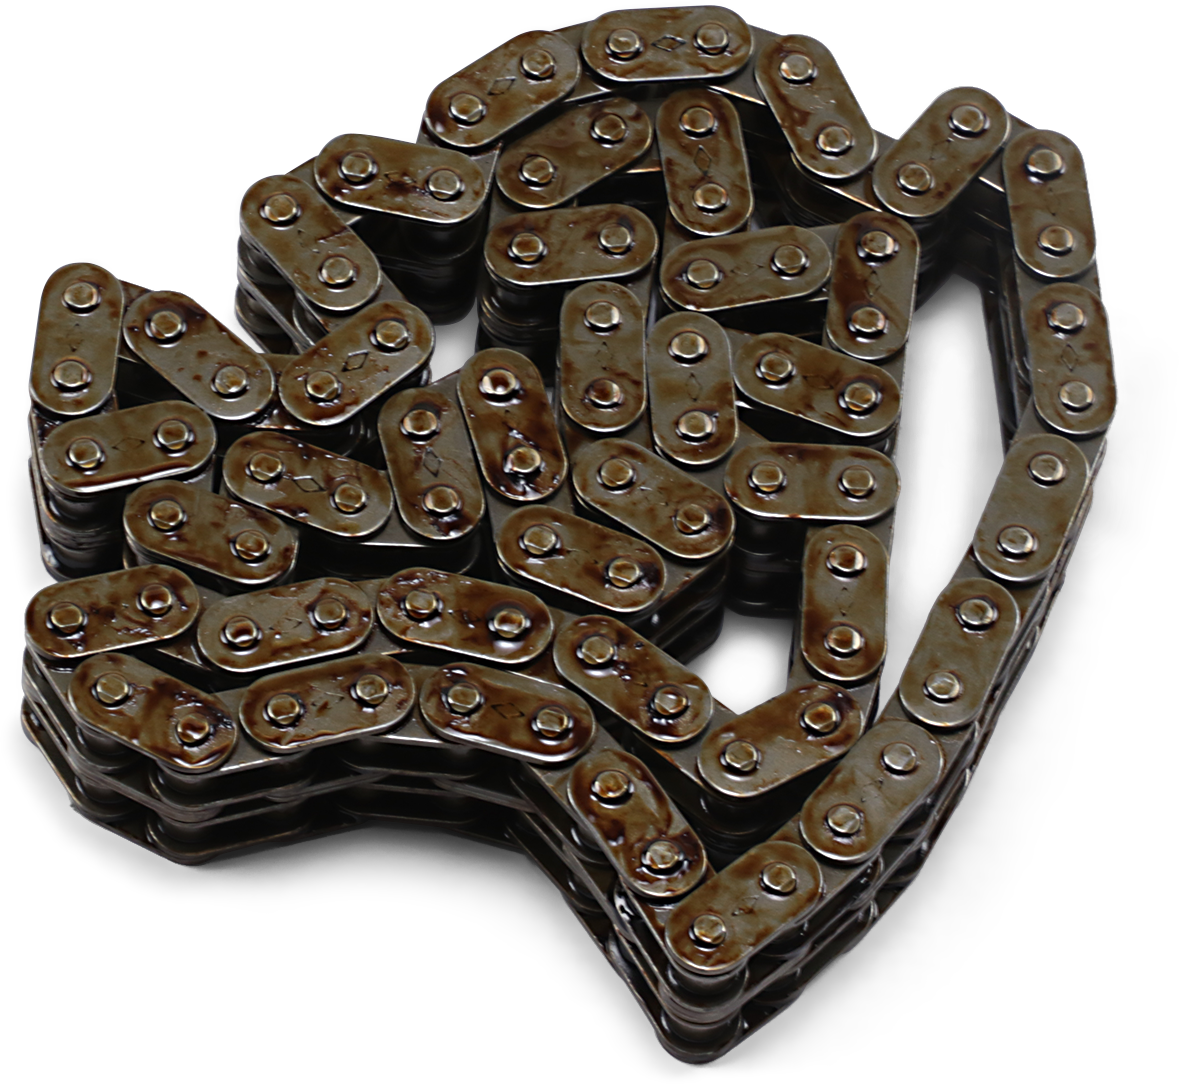 Diamond 82 Link 428-2 Primary Chain 1936-2006 Harley Dyna Touring Softail Models